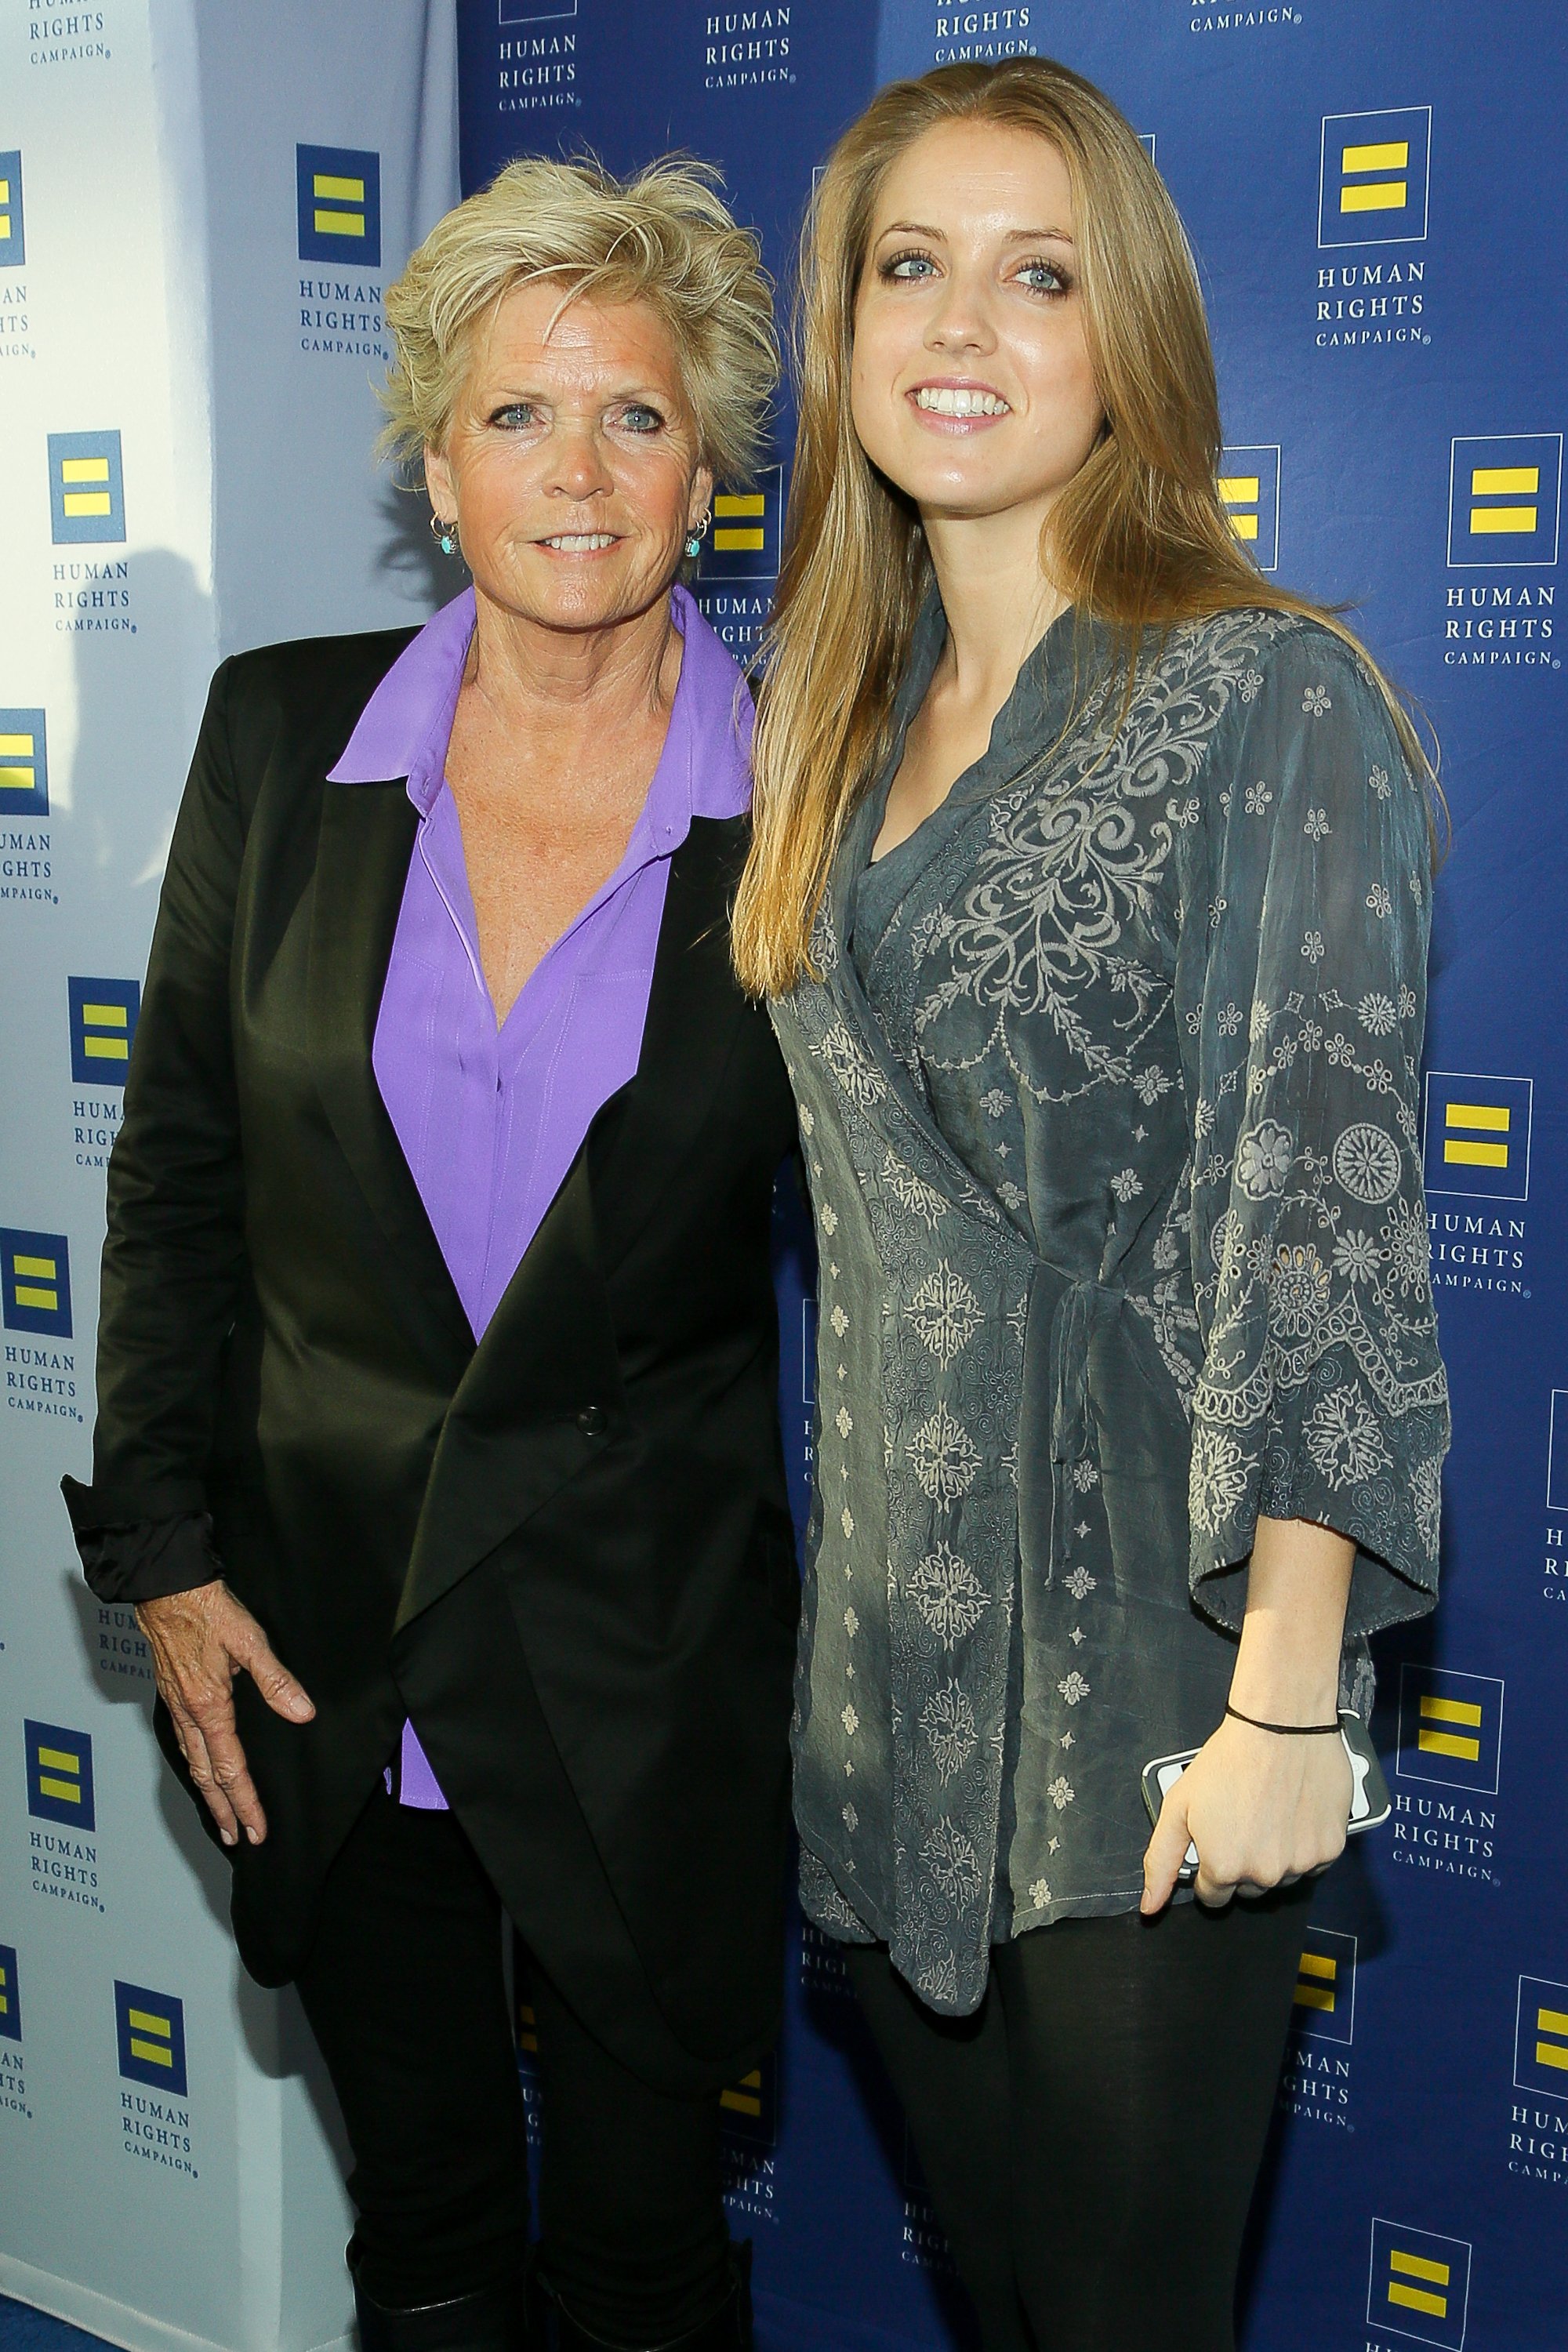 Meredith Baxter and Mollie Birney at the Human Rights Campaign Los Angeles Gala dinner on March 22, 2014, in California | Source: Getty Images